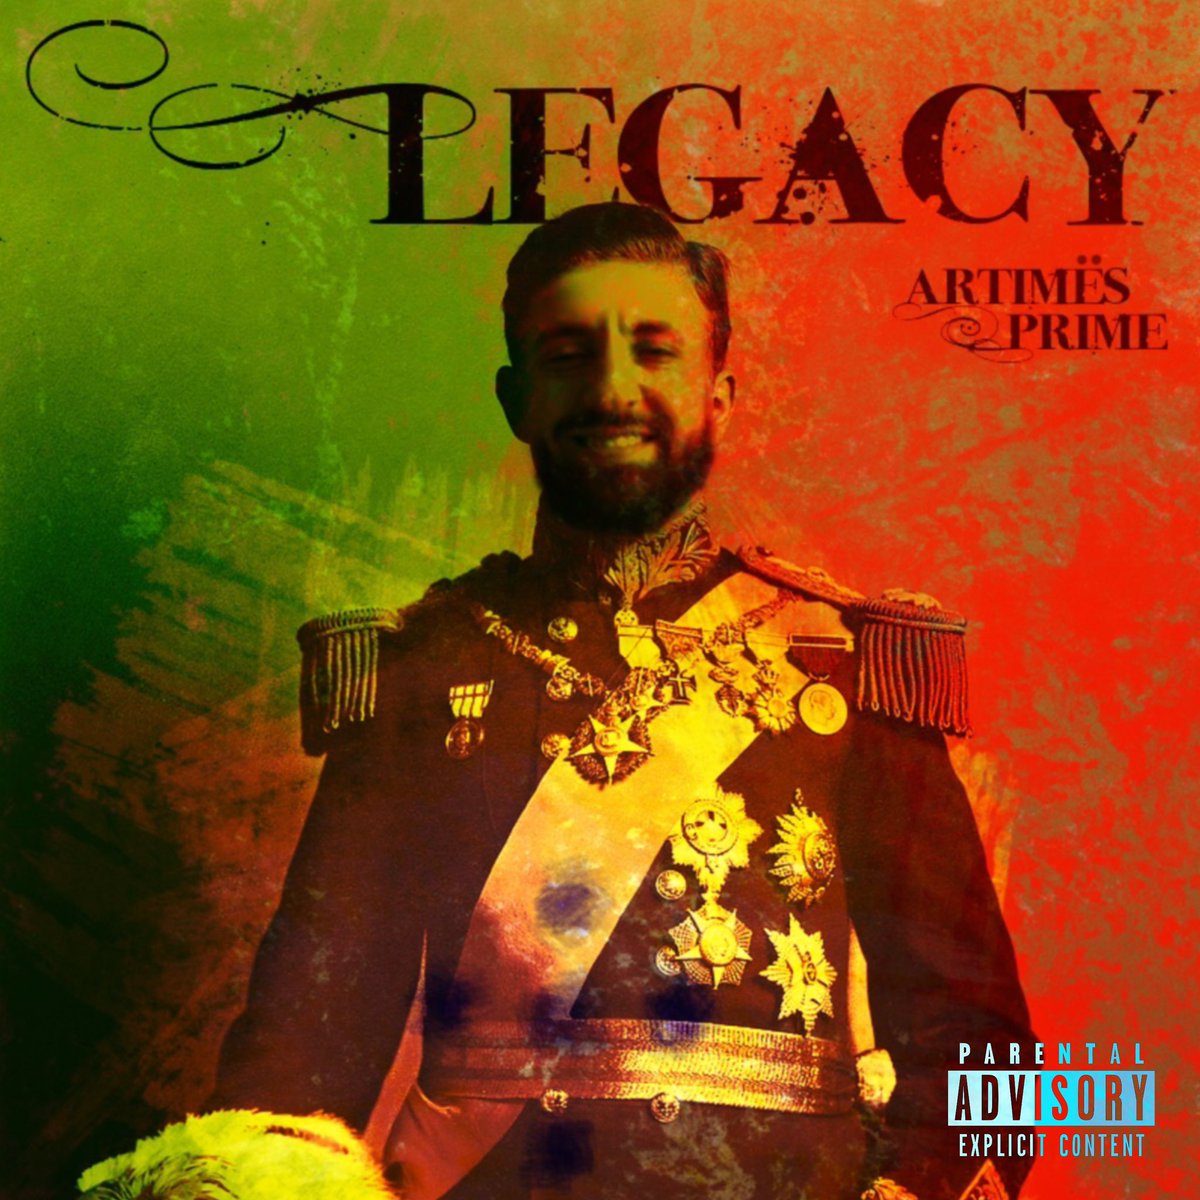 Midnight tonight! #TheLegacy continues 🇵🇹👀🇺🇸.

#primetribe #hiphop #newmusic #newsingle #newhiphop #newrap #consciousmusic #consciousart #conscioushiphop